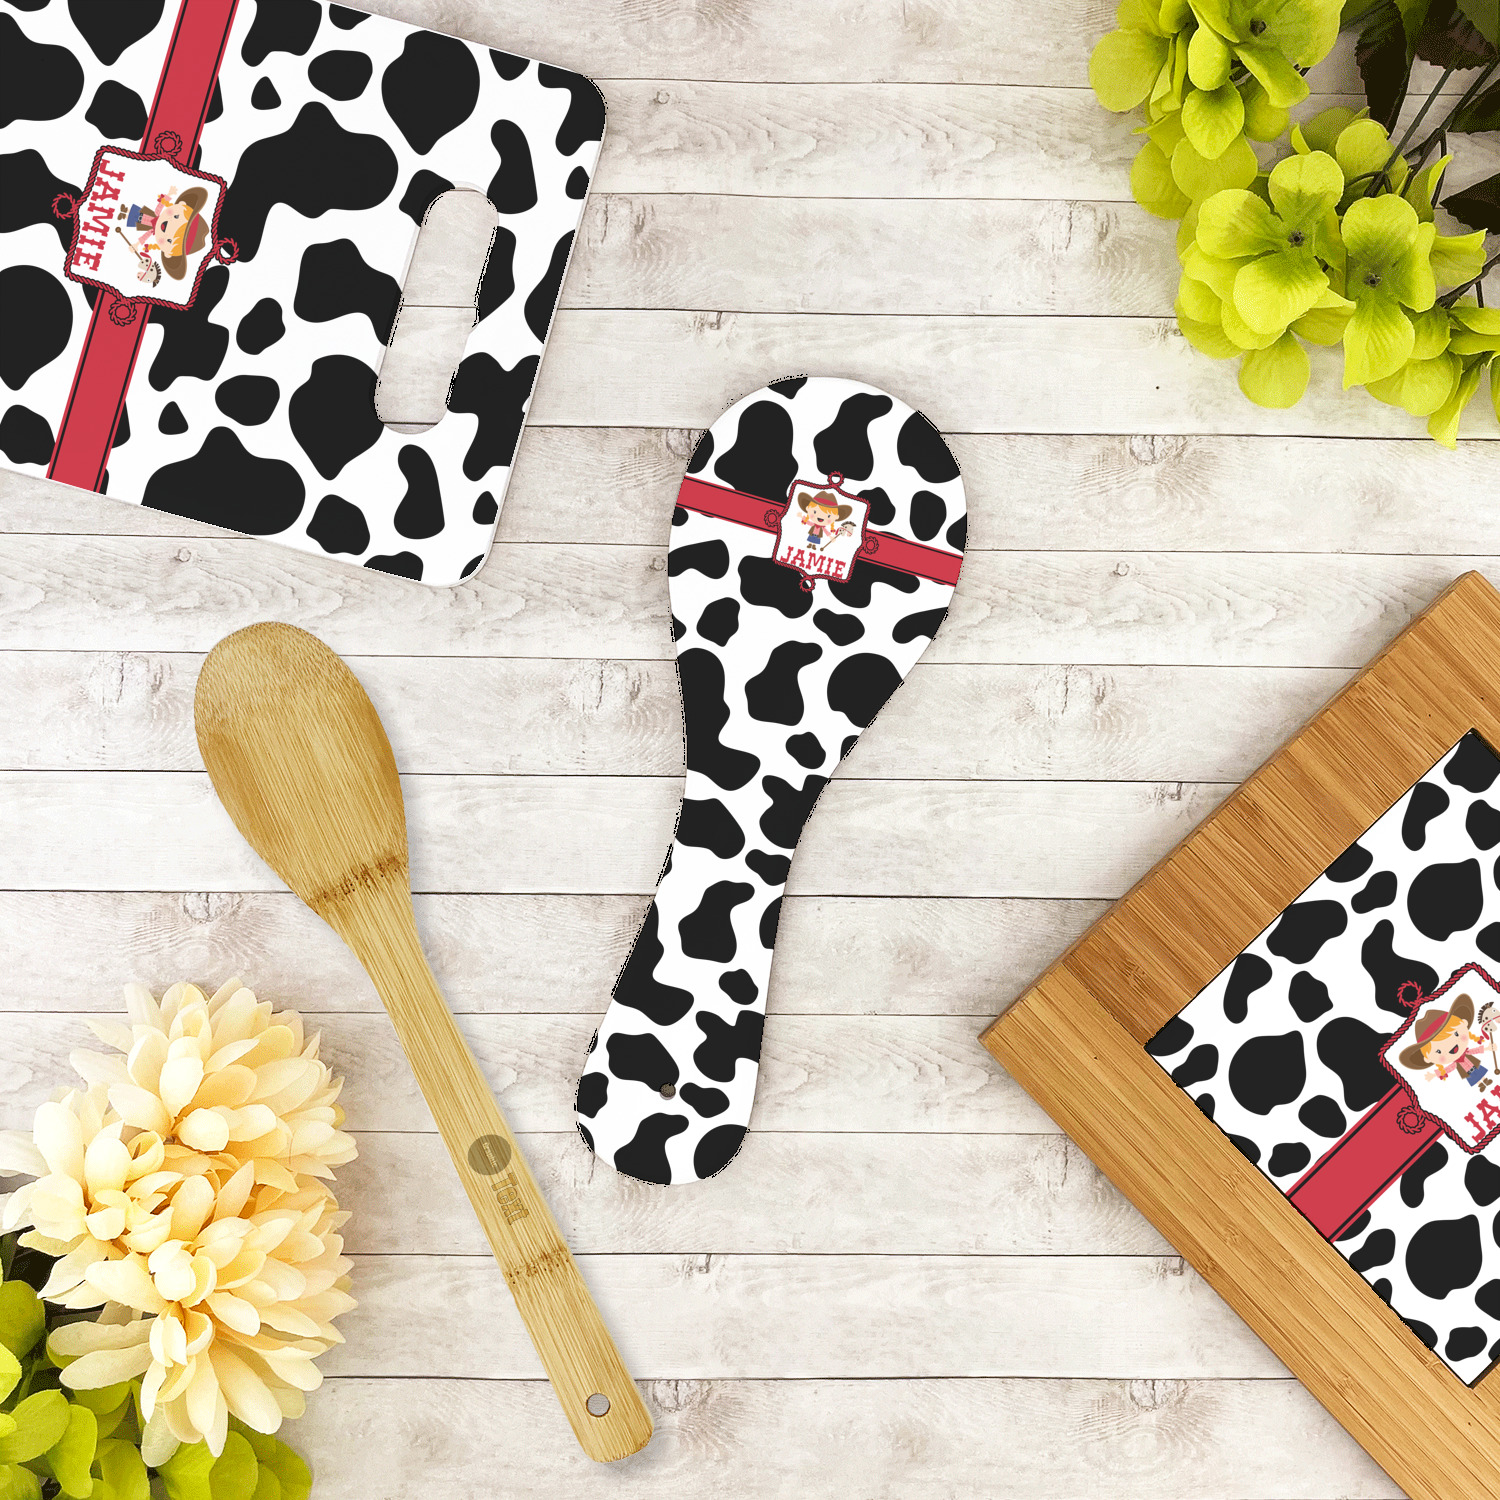 https://www.youcustomizeit.com/common/MAKE/43479/Cowprint-Cowgirl-Spoon-Rest-Trivet-LIFESTYLE.jpg?lm=1632762642